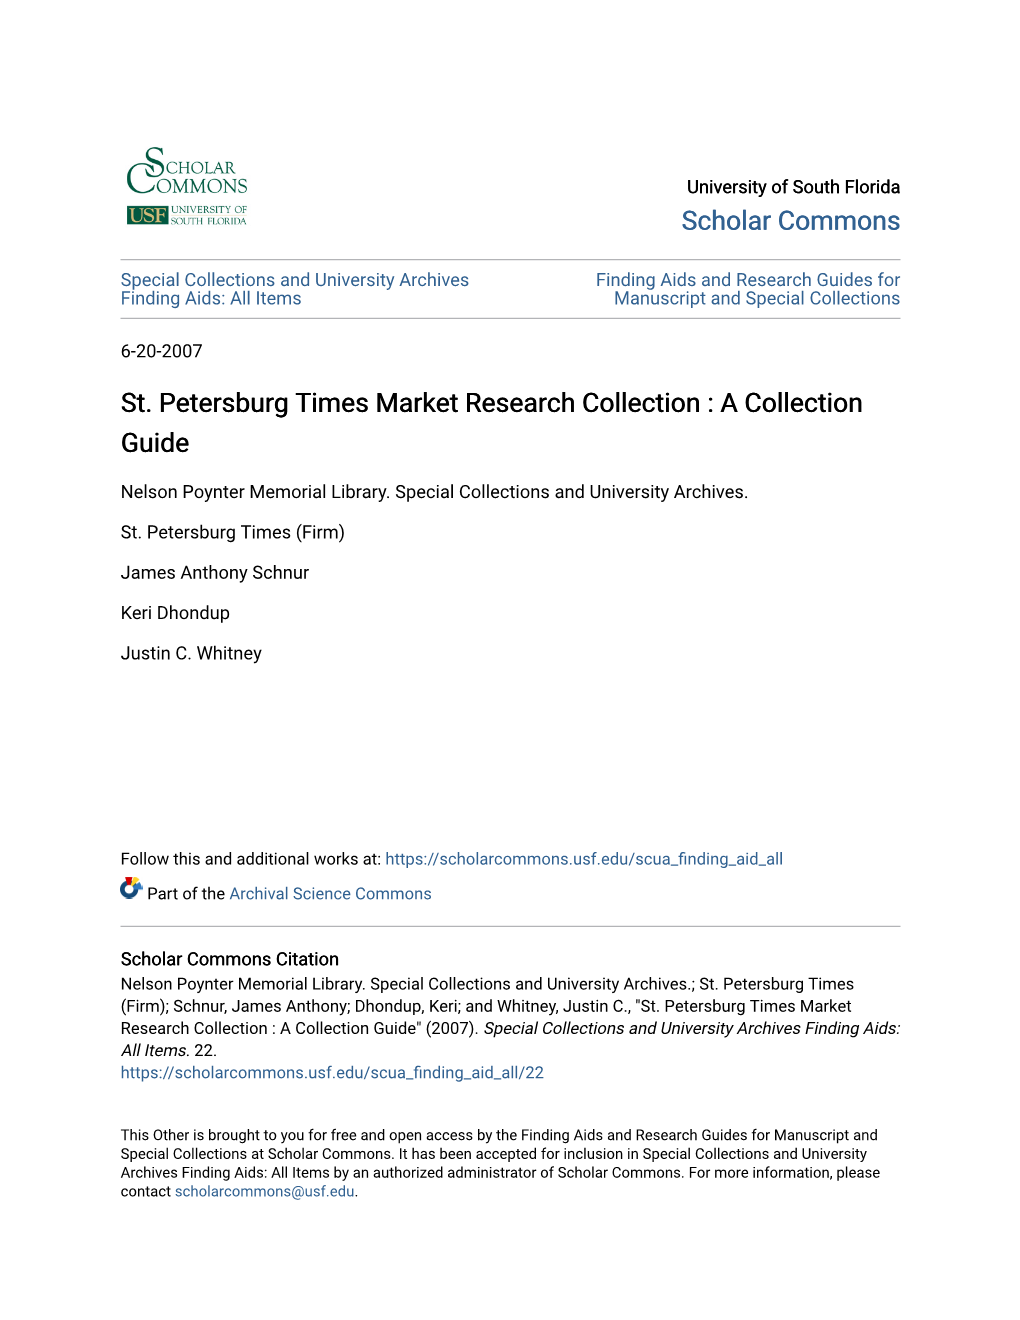 St. Petersburg Times Market Research Collection : a Collection Guide